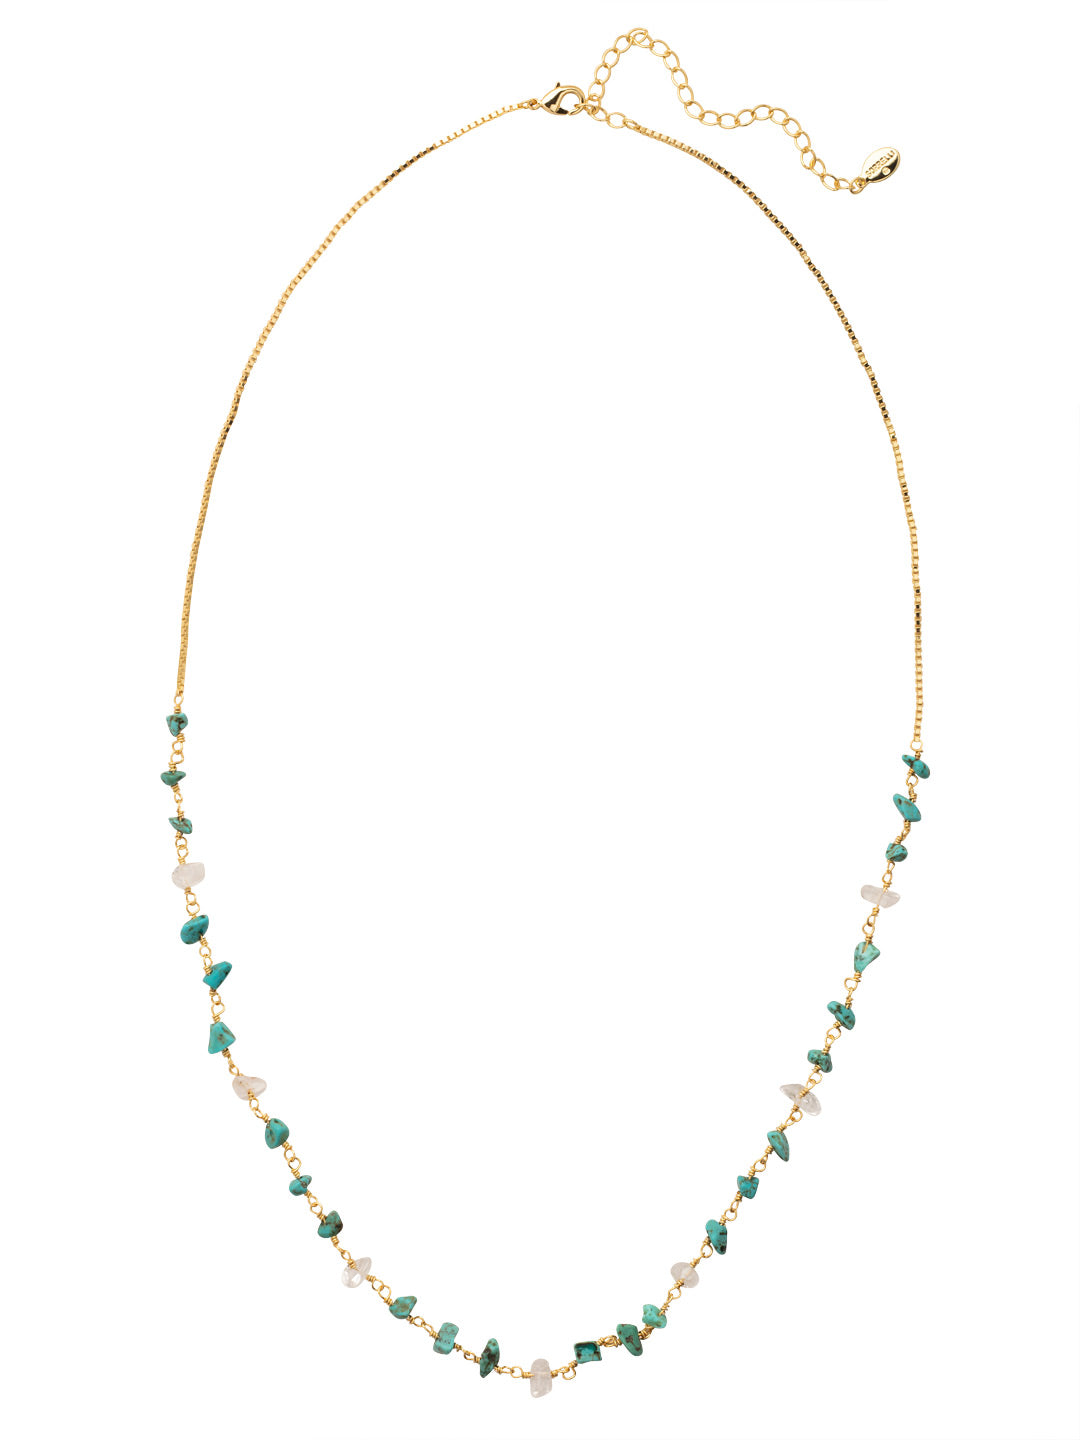 Carol Long Necklace - NFD7BGSTO - <p>The Carol Long Necklace features semi-precious stones and clear crystal rock chips, on an adjustable chain secured by a lobster claw clasp. From Sorrelli's Santorini collection in our Bright Gold-tone finish.</p>